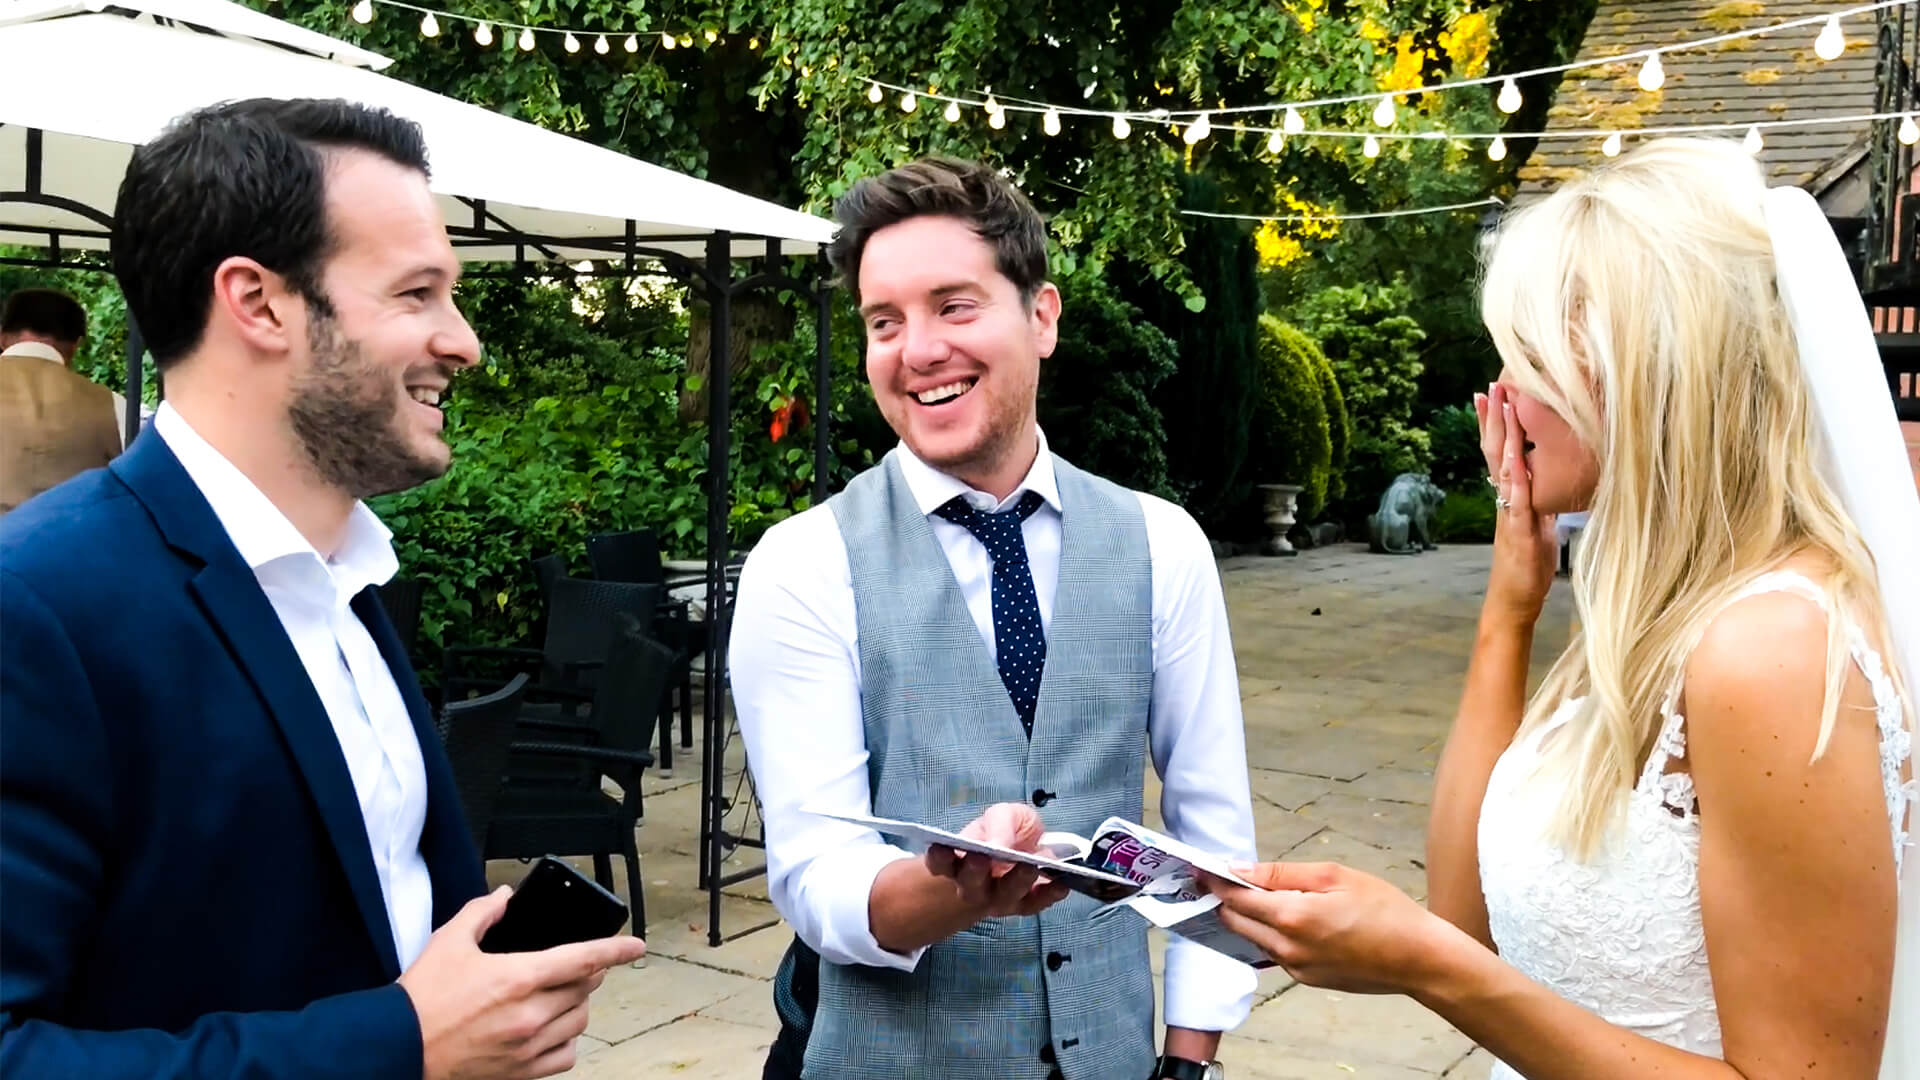 Manchester wedding magician Aaron Calvert stunning bride and groom in cheshire wedding with incredible magic